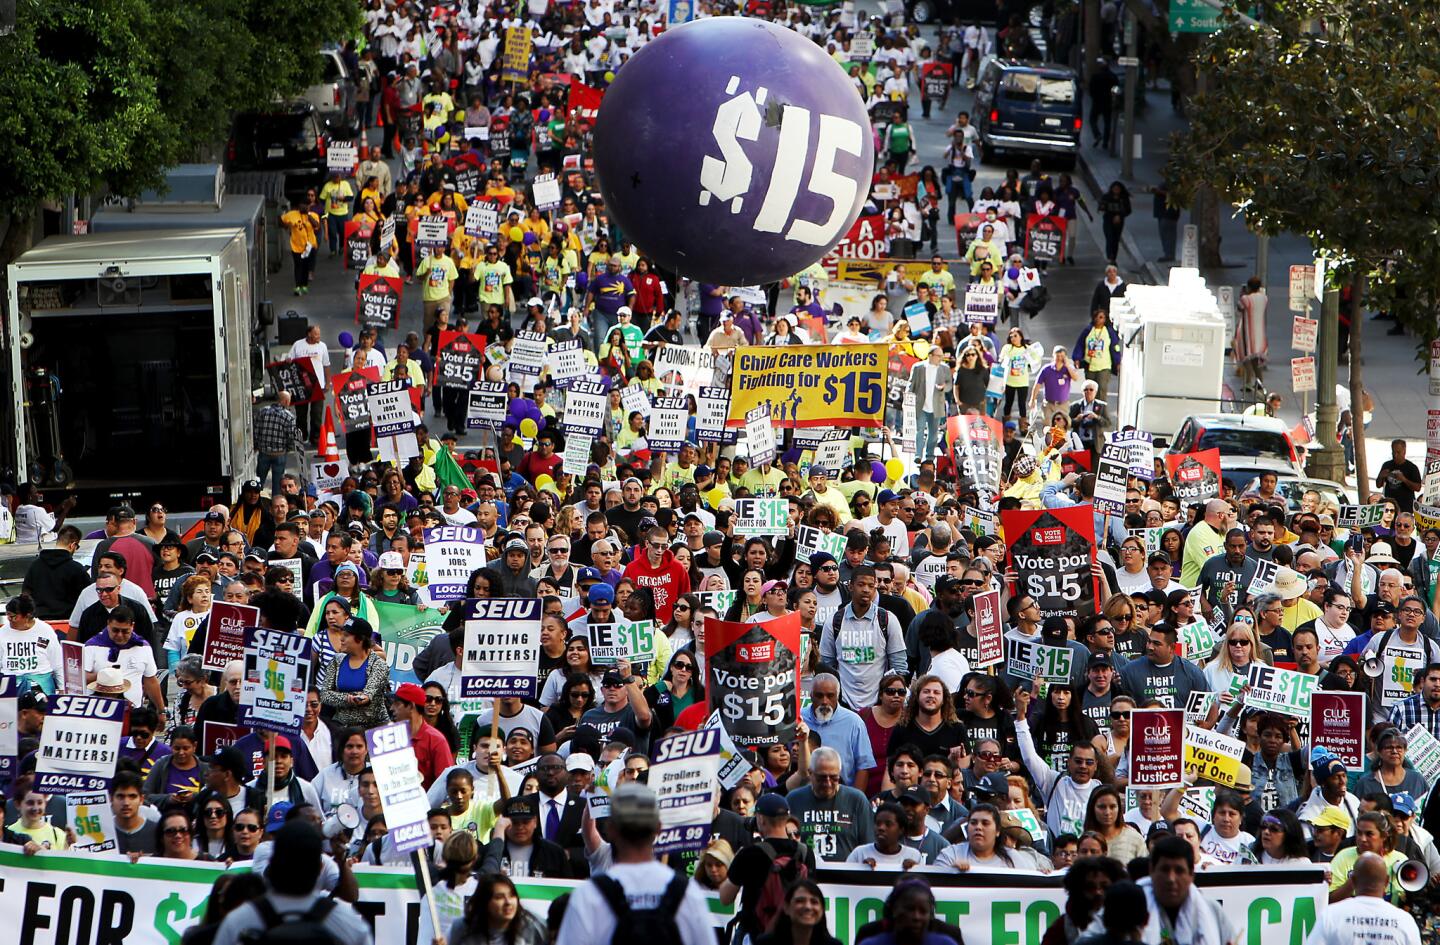 Protesters march through the financial district of Los Angeles on Tuesday to press demands for a minimum wage of $15 per hour.